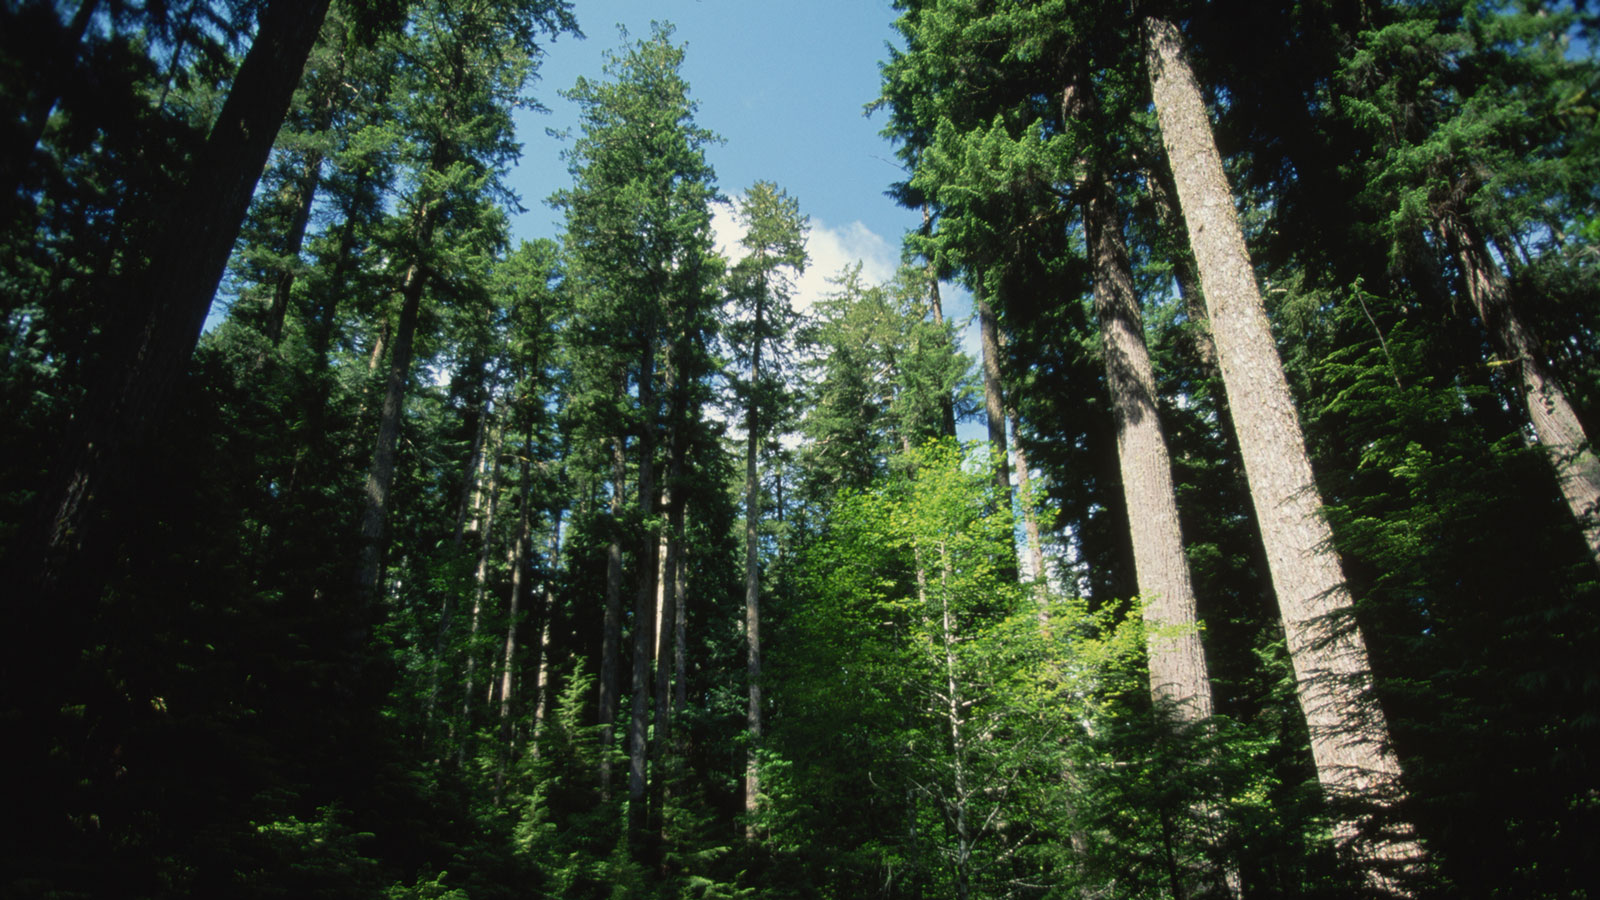 An old-growth forest of Douglas firs in Oregon